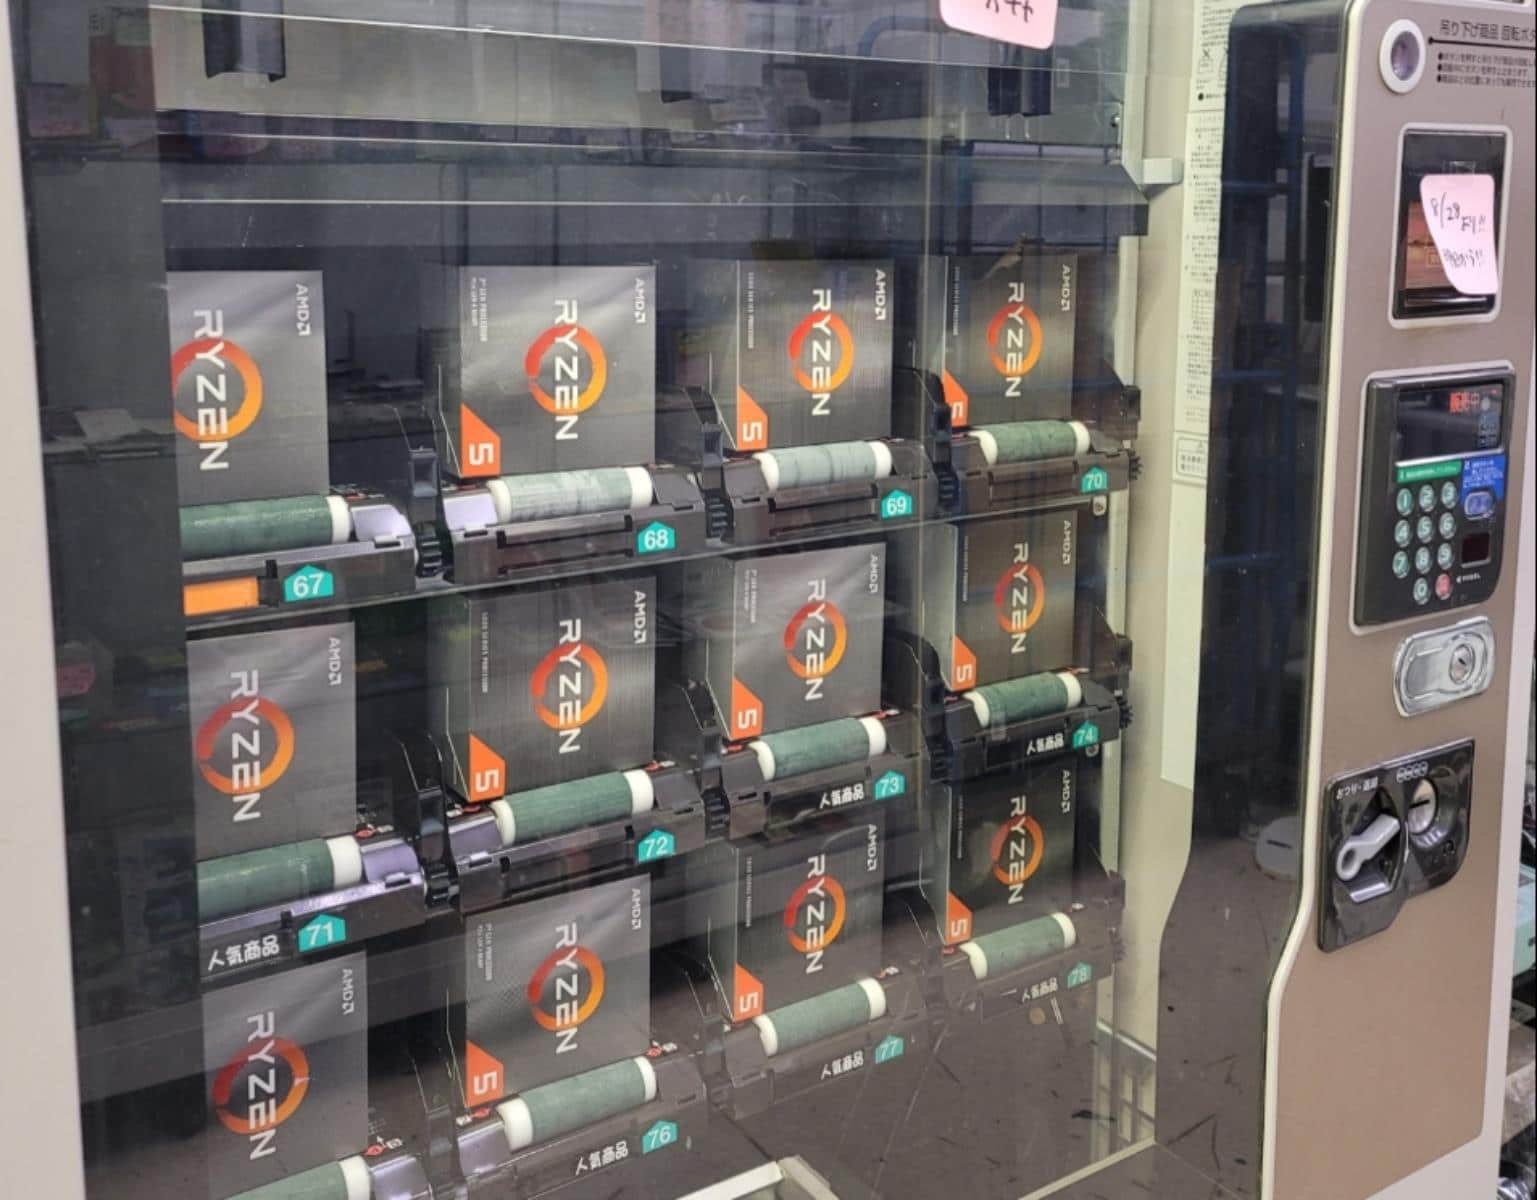 Ryzen vending machine for PLN 35?  This is no joke, but the content leaves much to be desired